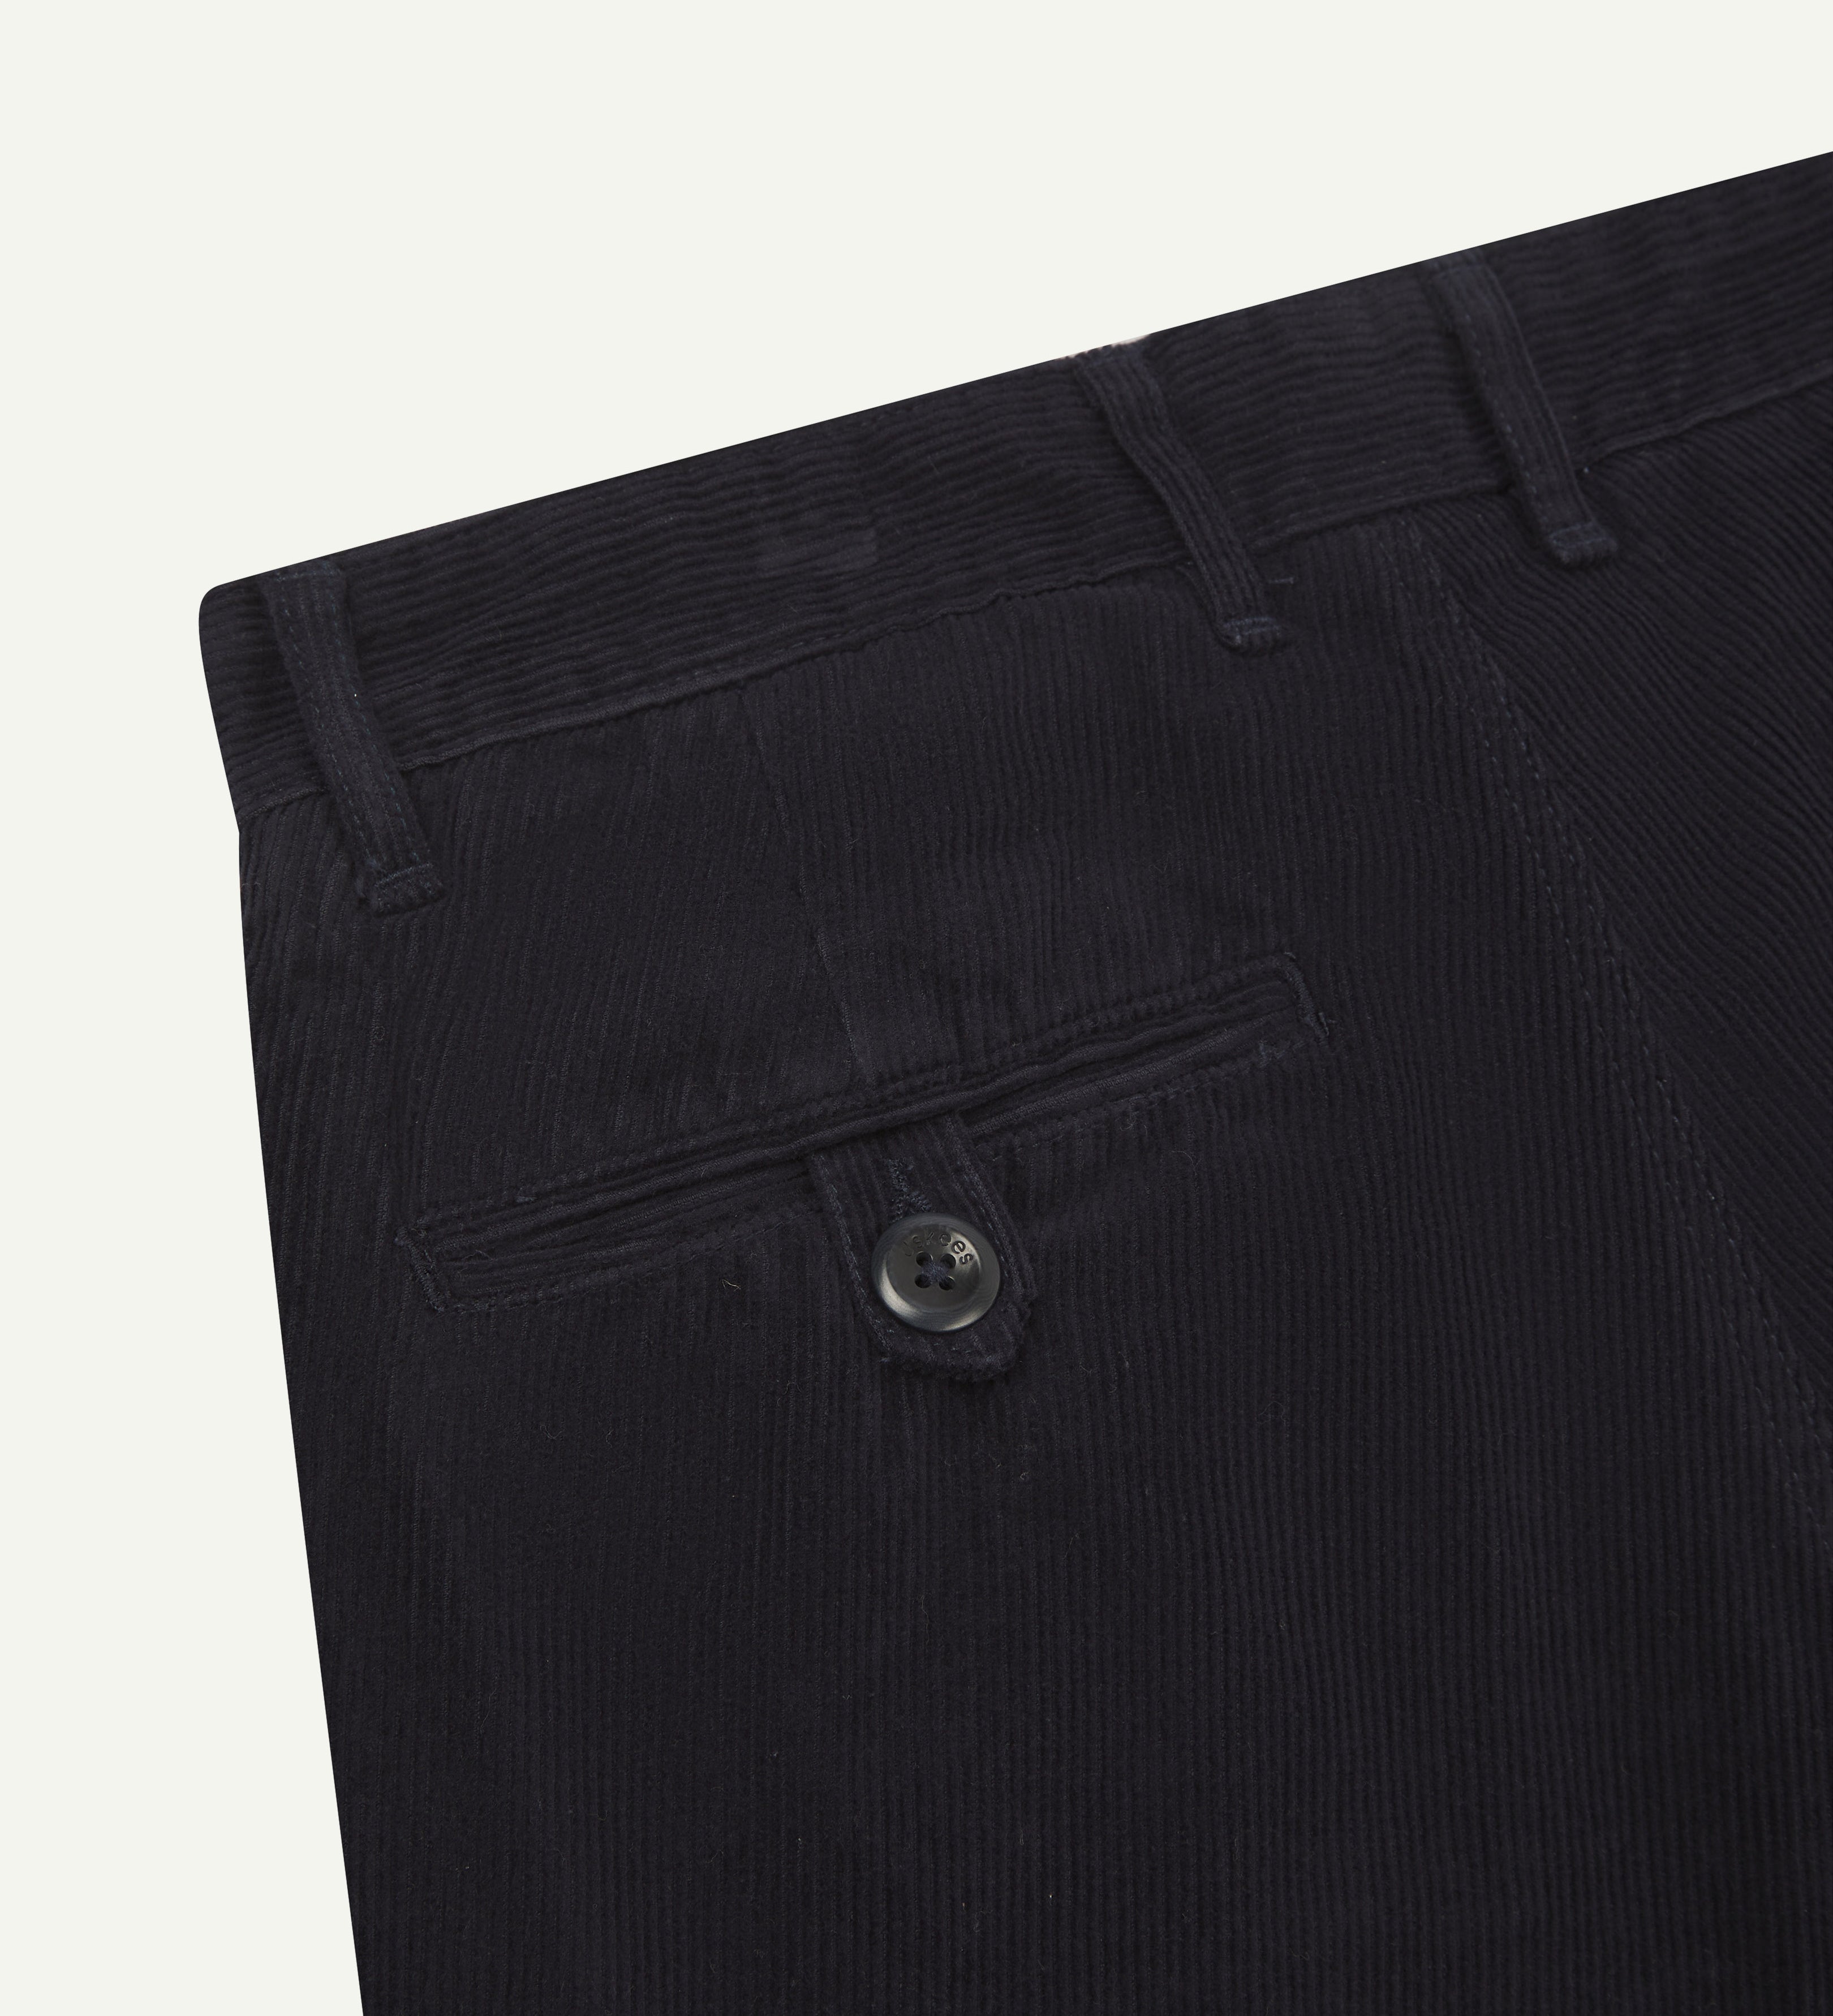 Back flat shot of #5018 Uskees men's organic corduroy boat trousers in navy blue showing belt loops and buttoned back pocket.